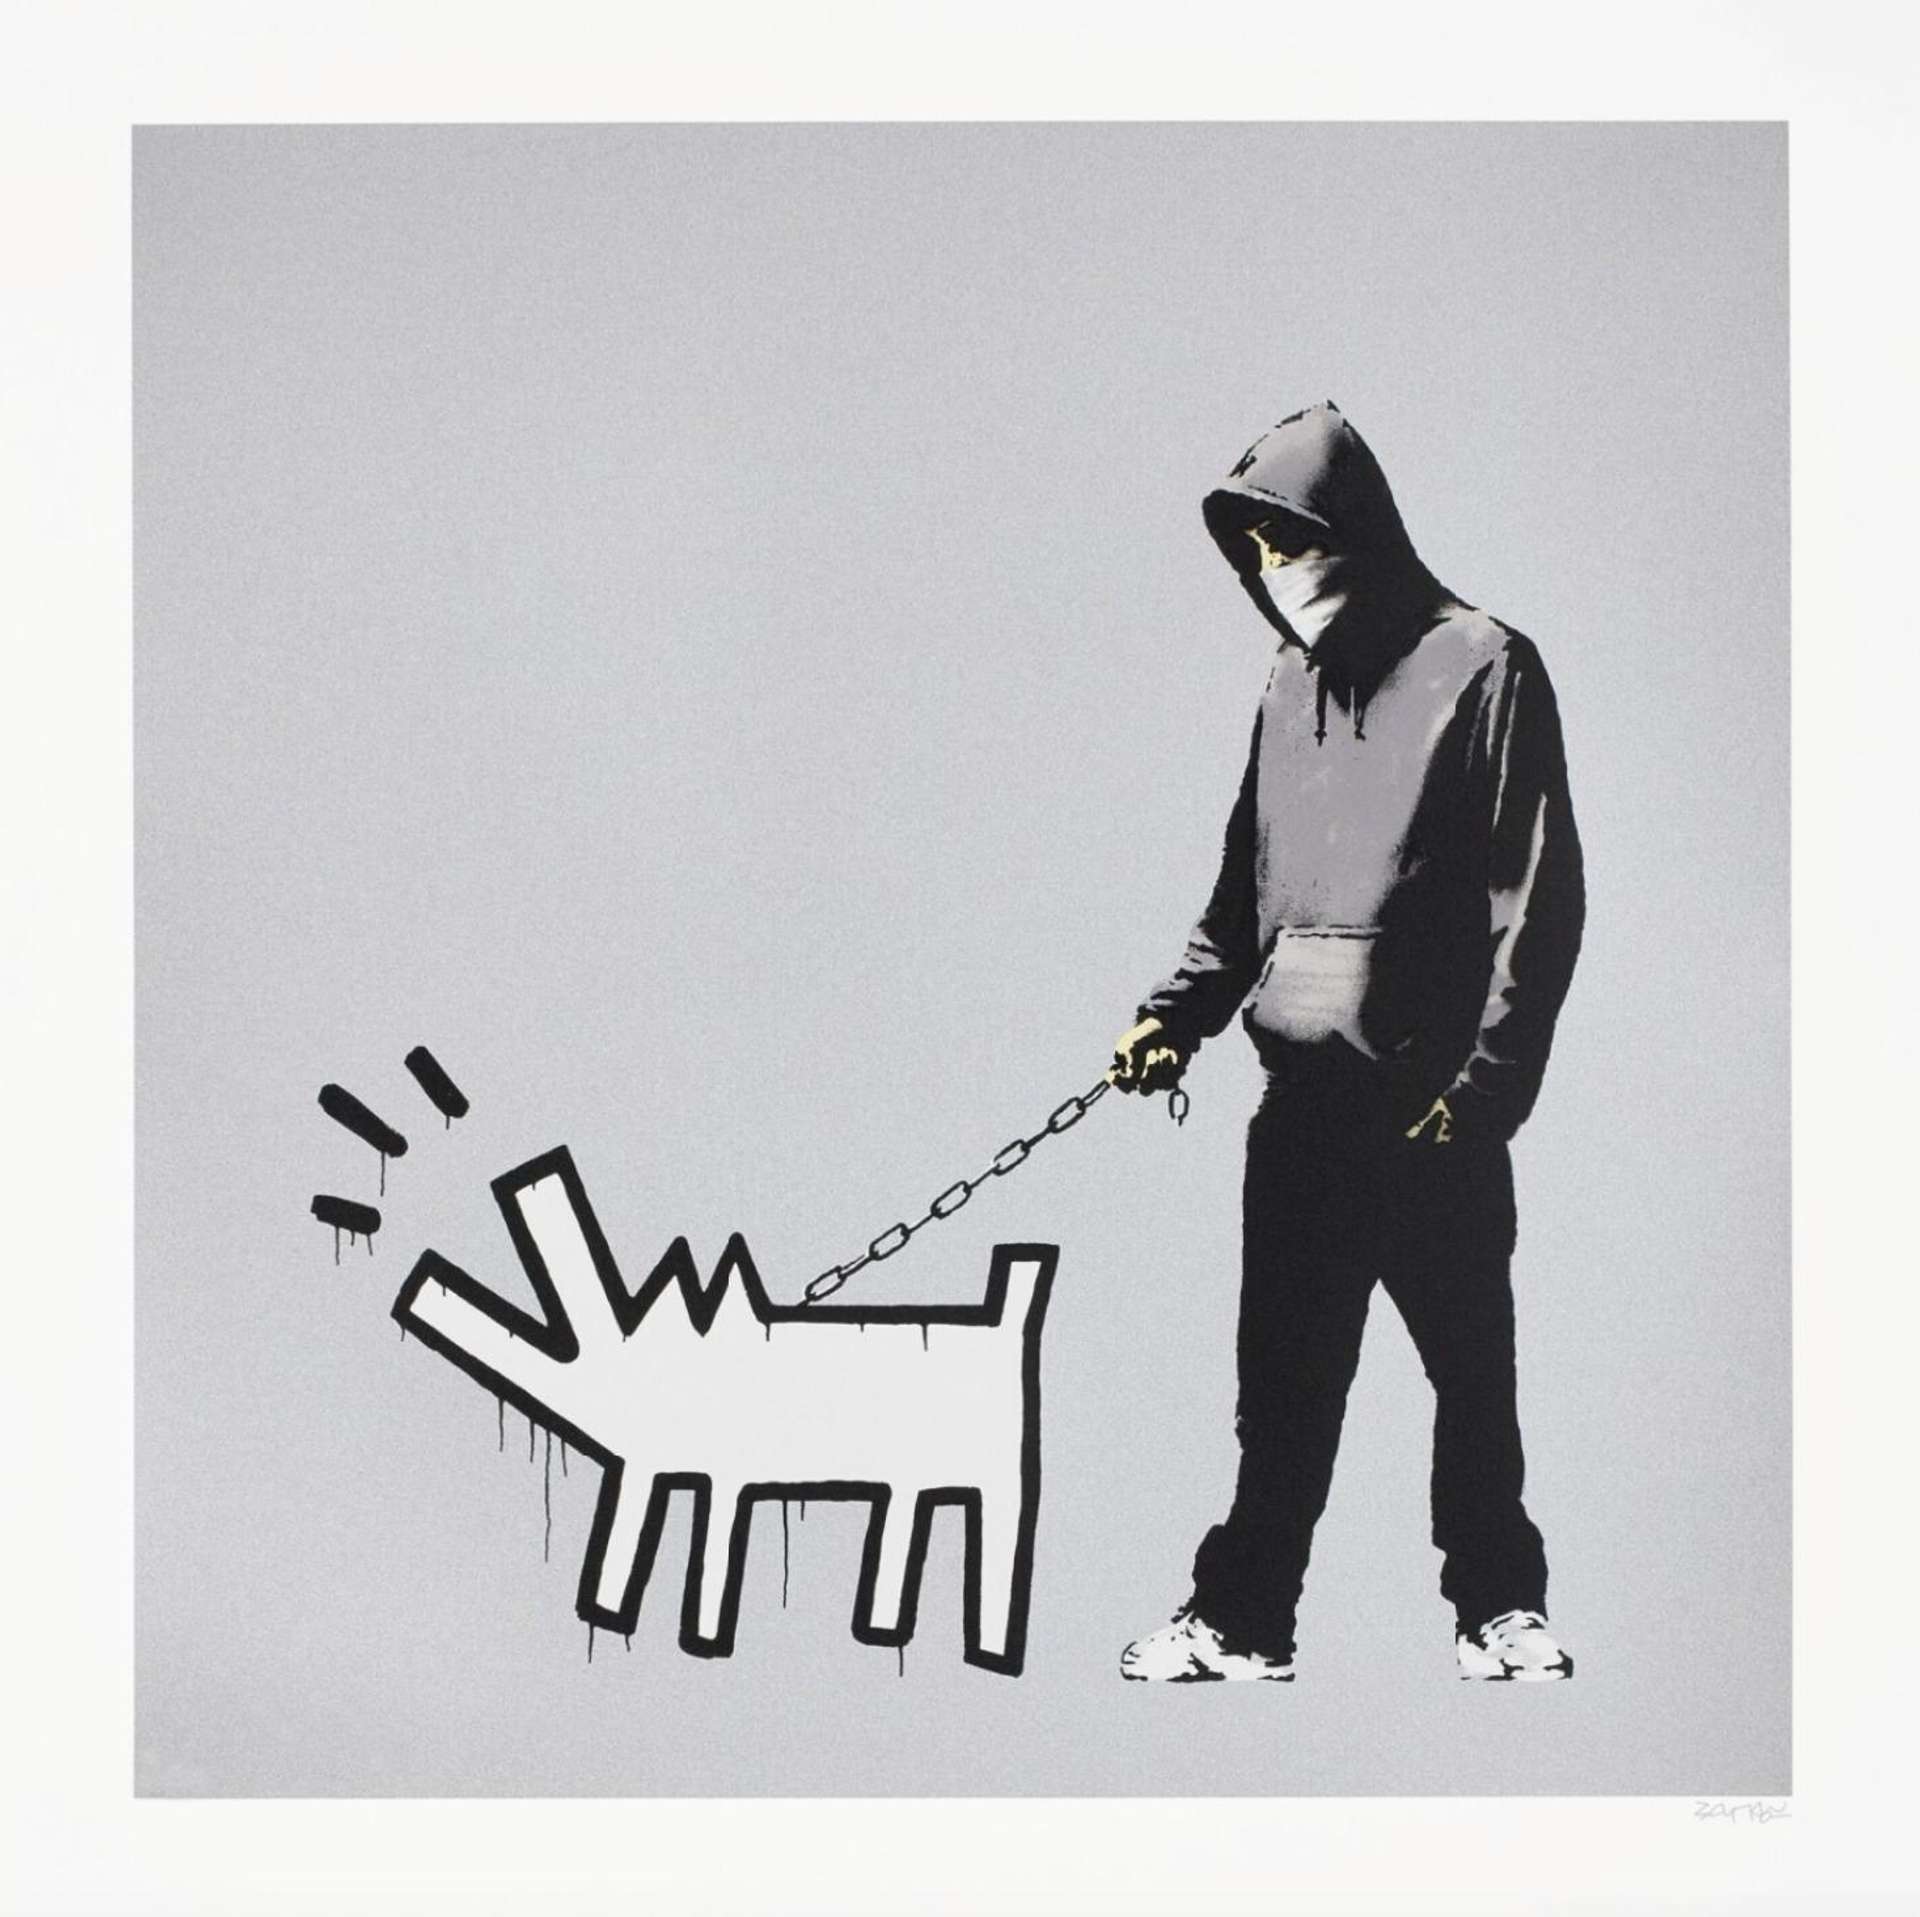 A young man wearing denim and an oversized hooded sweatshirt, with a bandana covering his face and his hood pulled up, stands in a wide stance. He has one hand in his pocket and holds a cartoon barking dog on a chain leash. The artwork is set against a silver background.